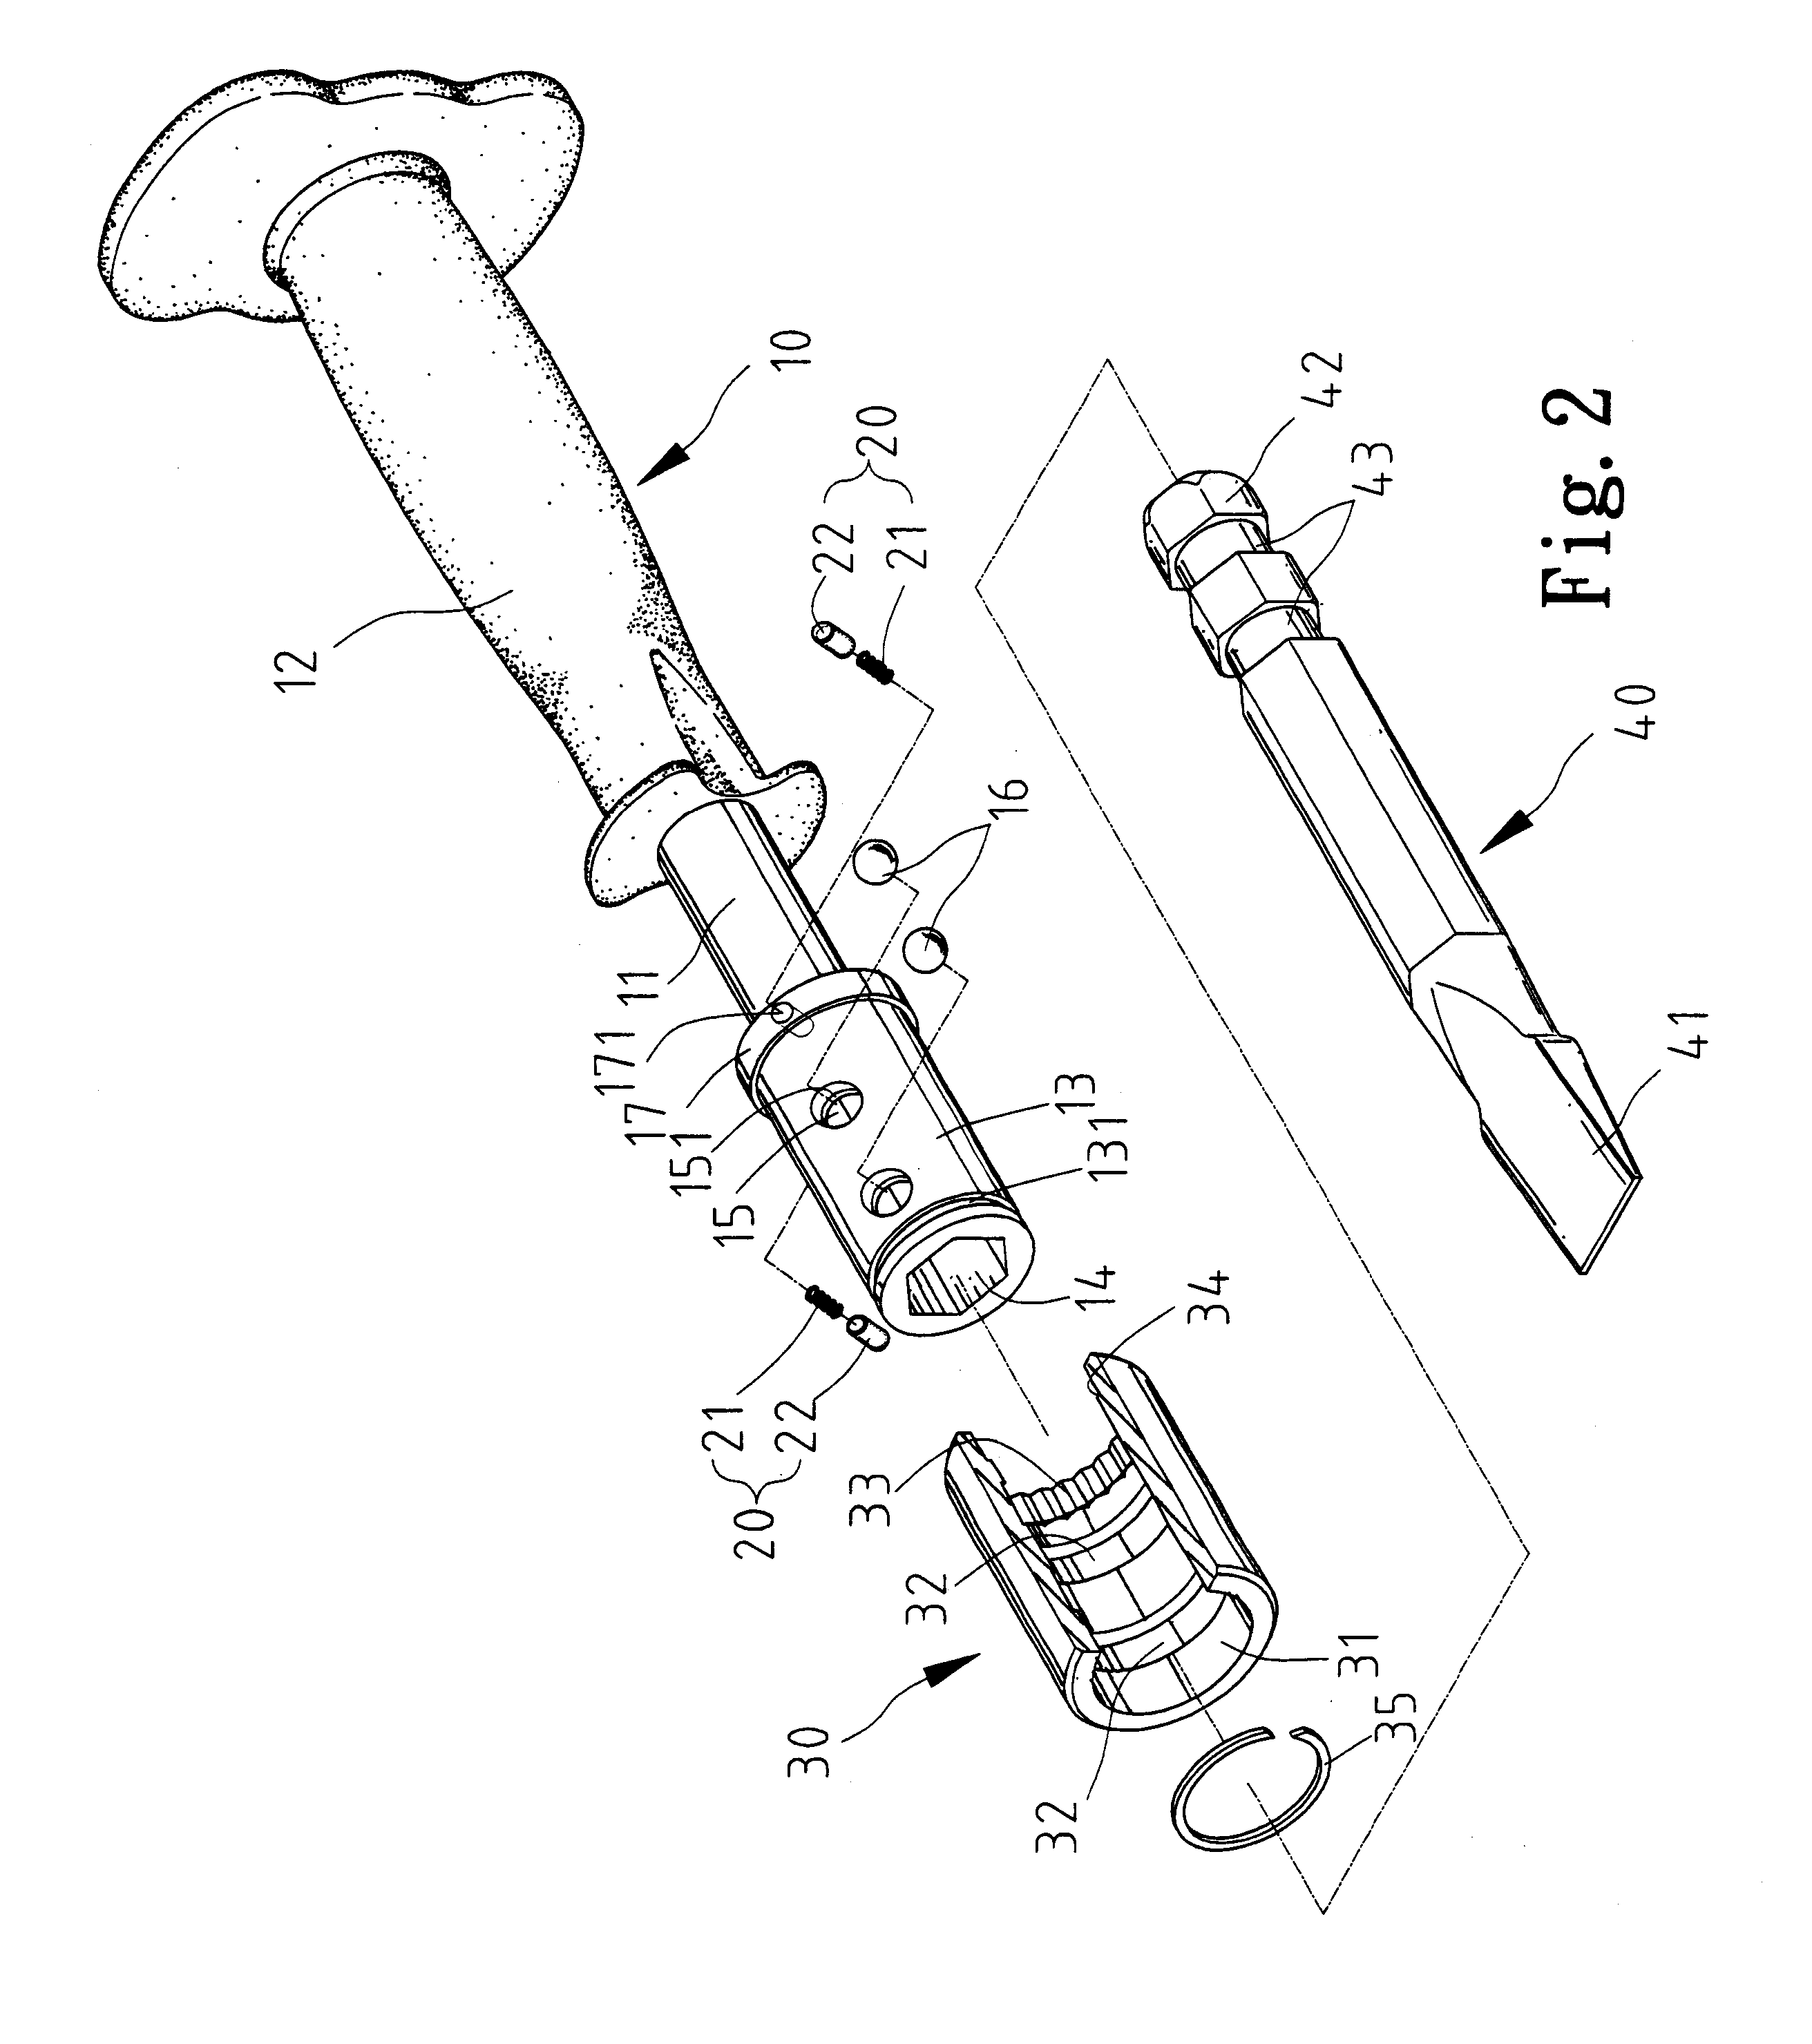 Tool including a tool bit and a handle